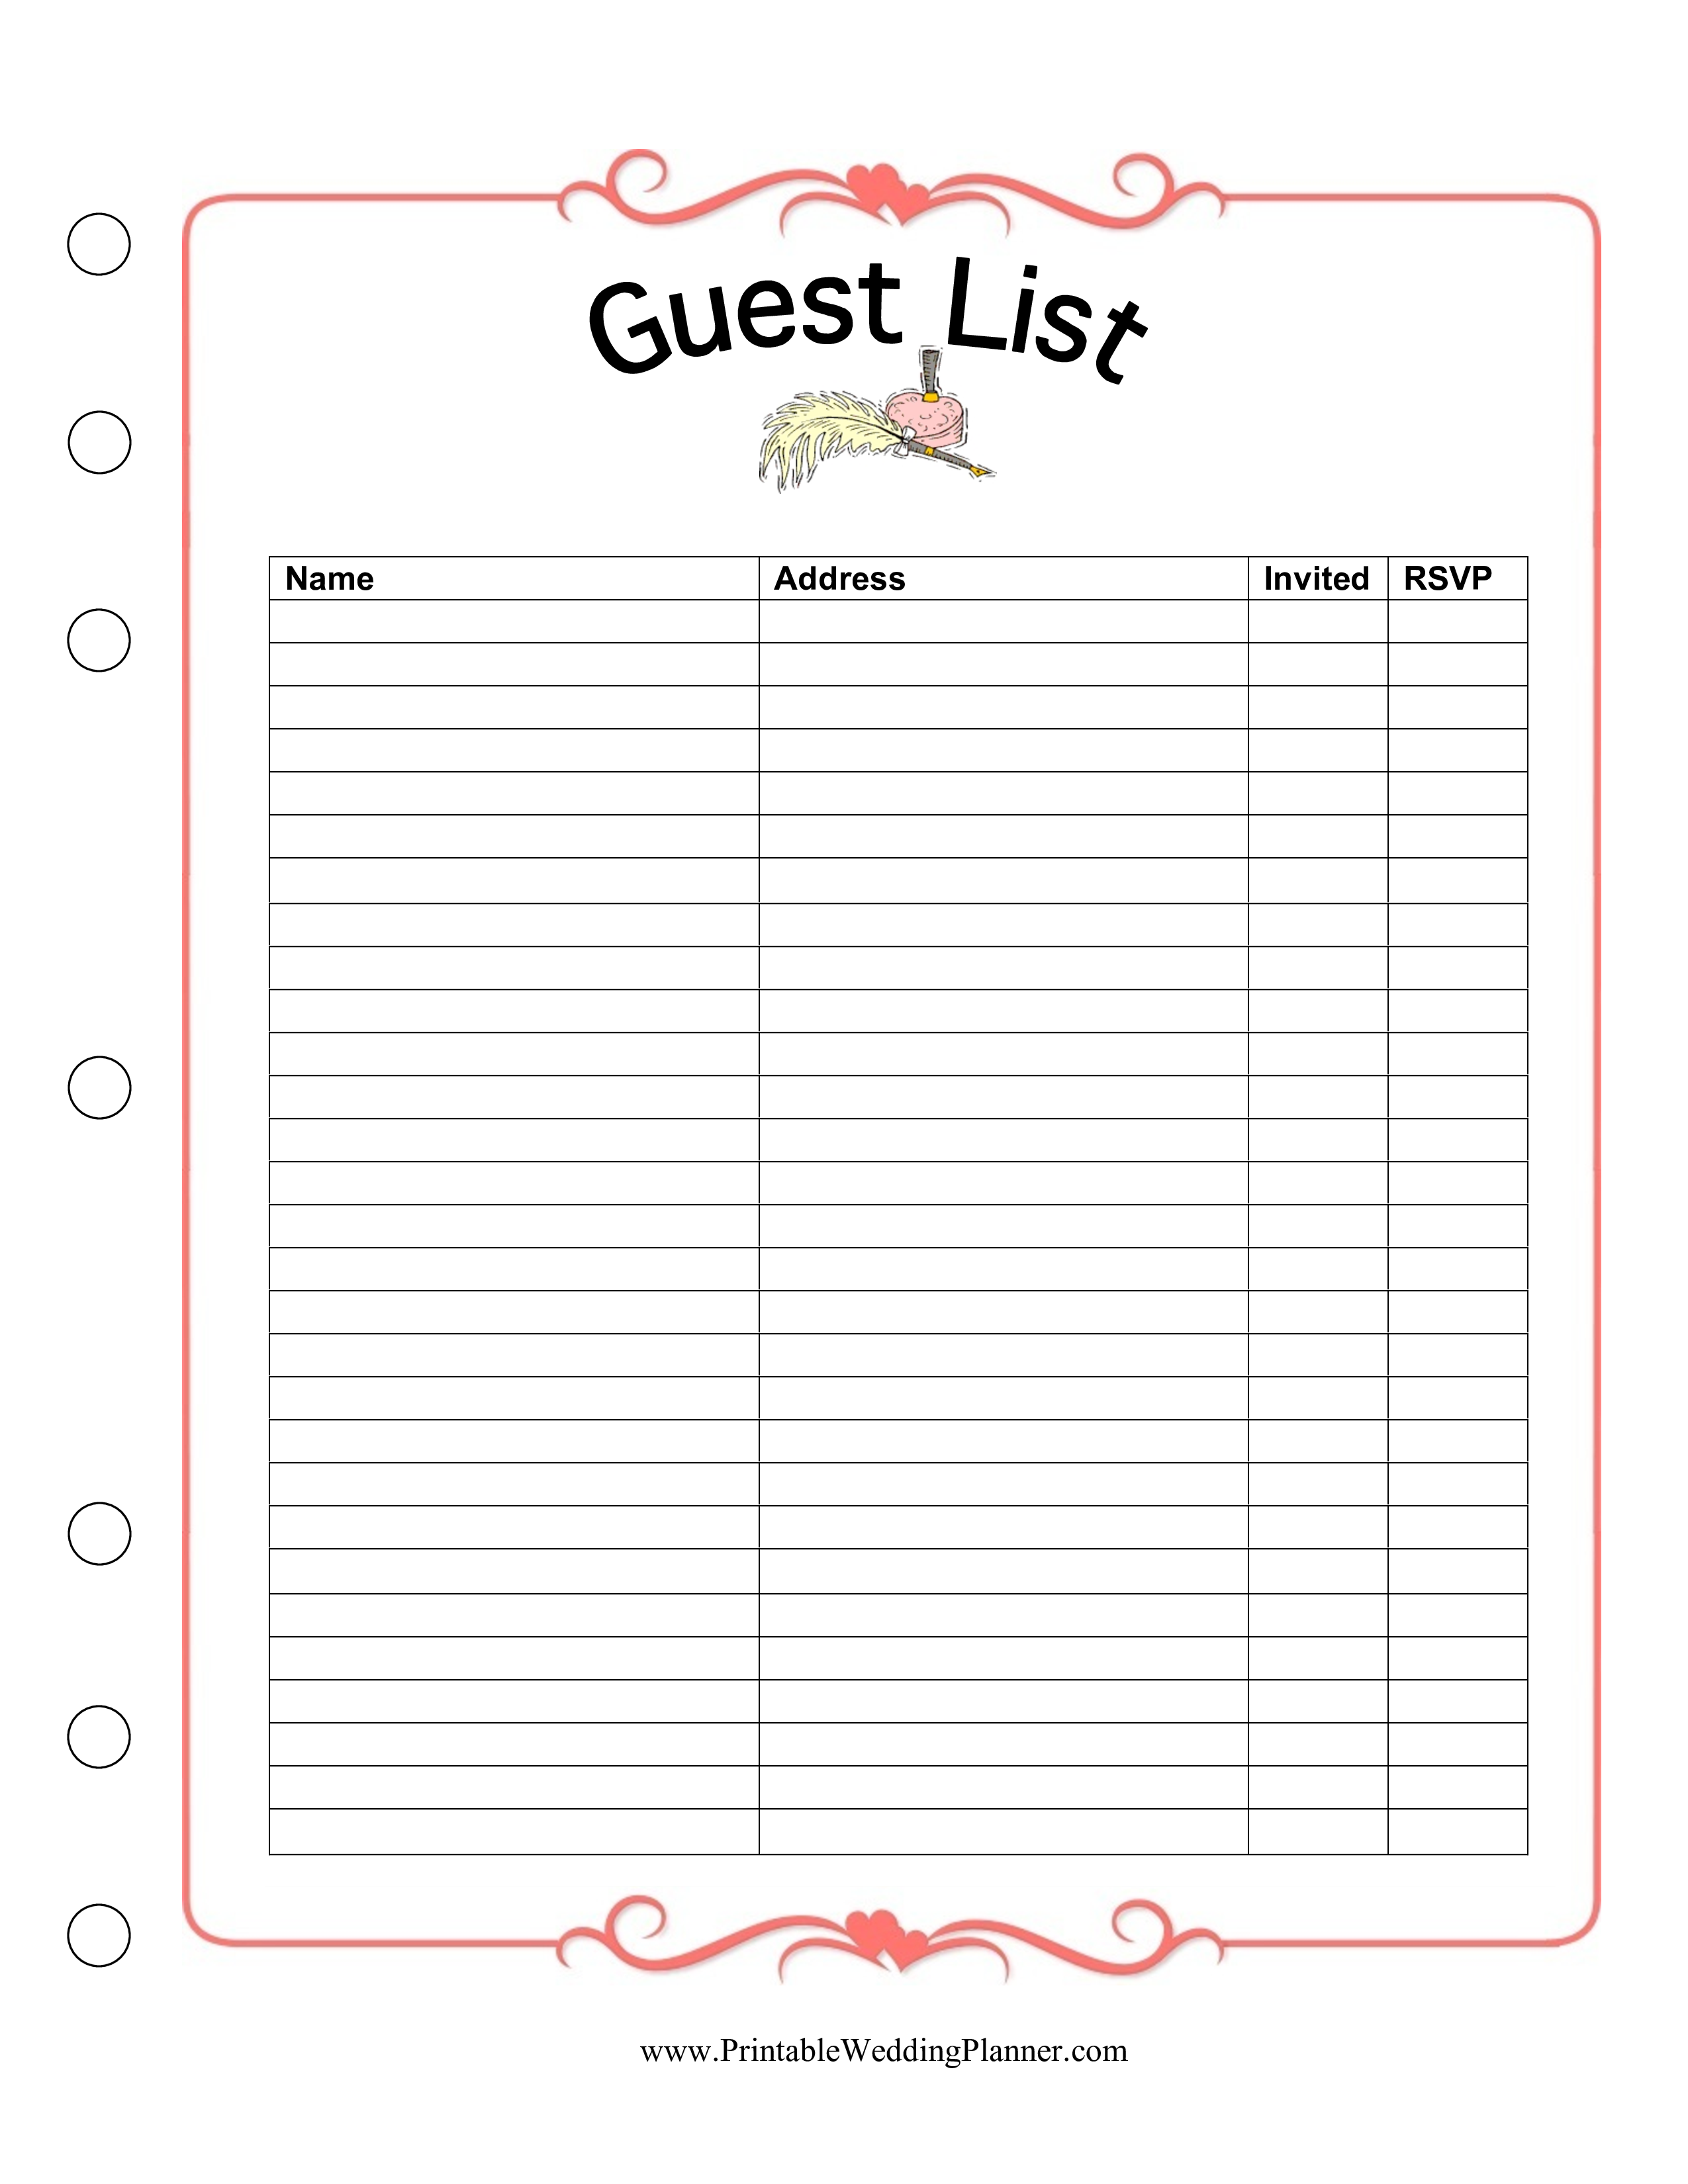 wedding guest list template free download